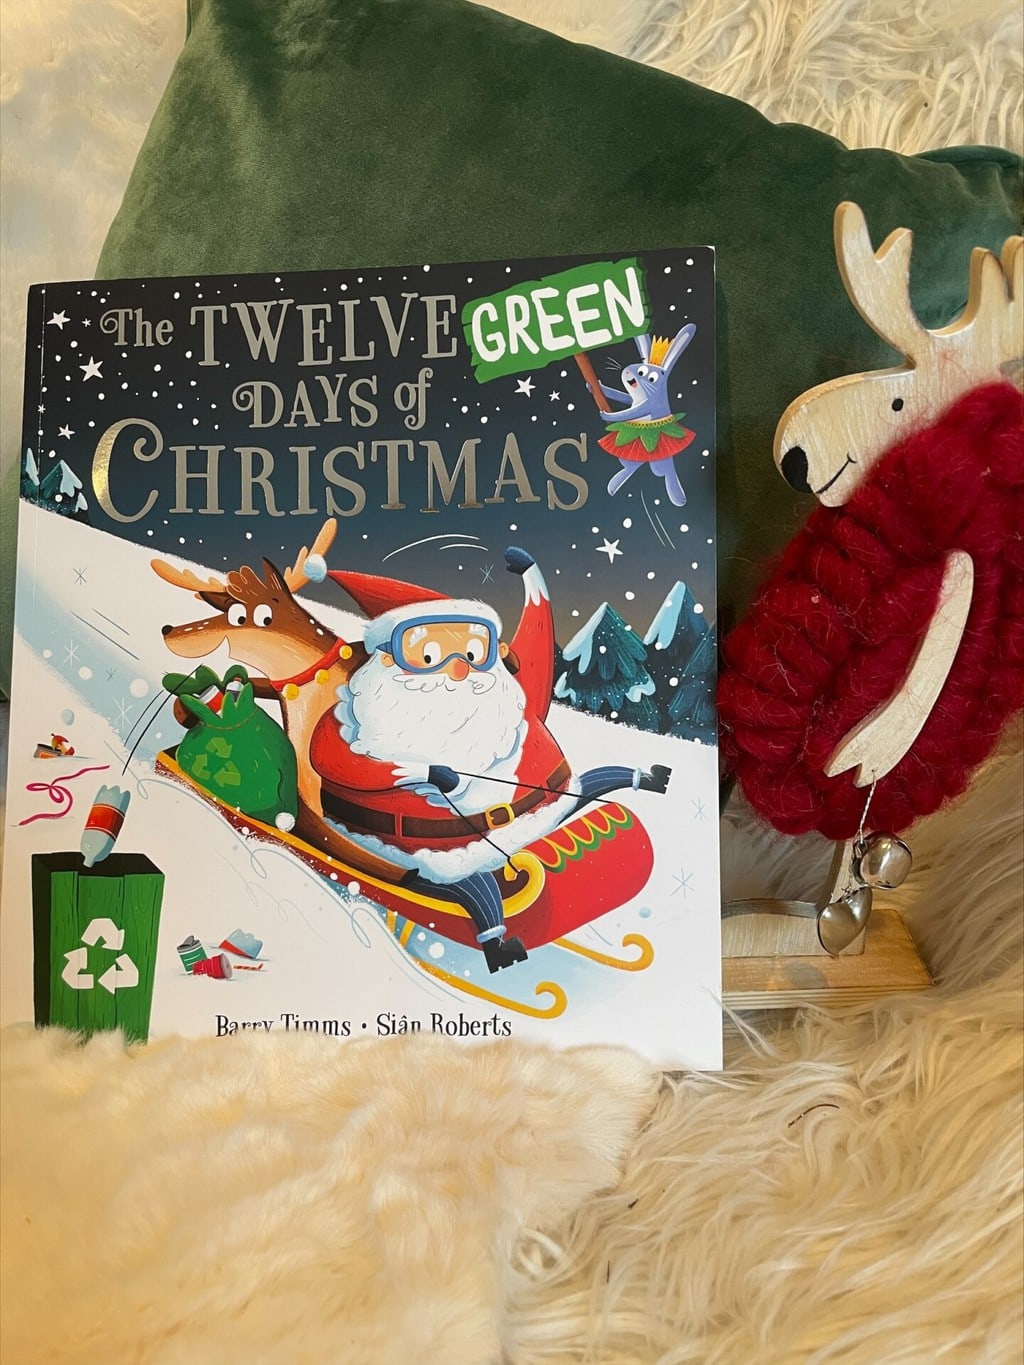 The Twelve Green Days of Christmas – Barry Timms (author), Sian Robers (illustrator) Farshore (publisher)